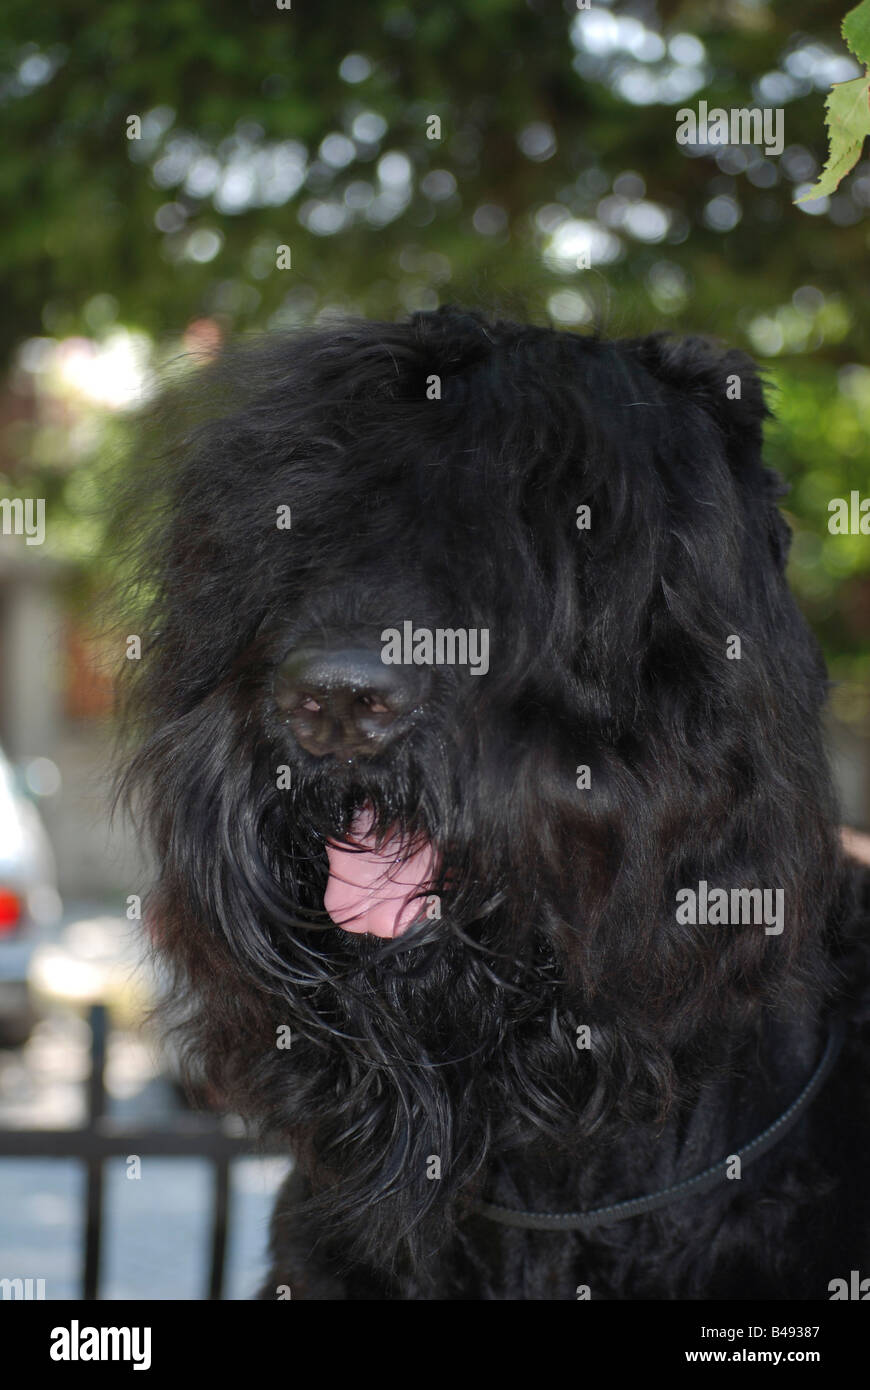 Dog Black Russian Terrier High Resolution Stock Photography And Images Alamy